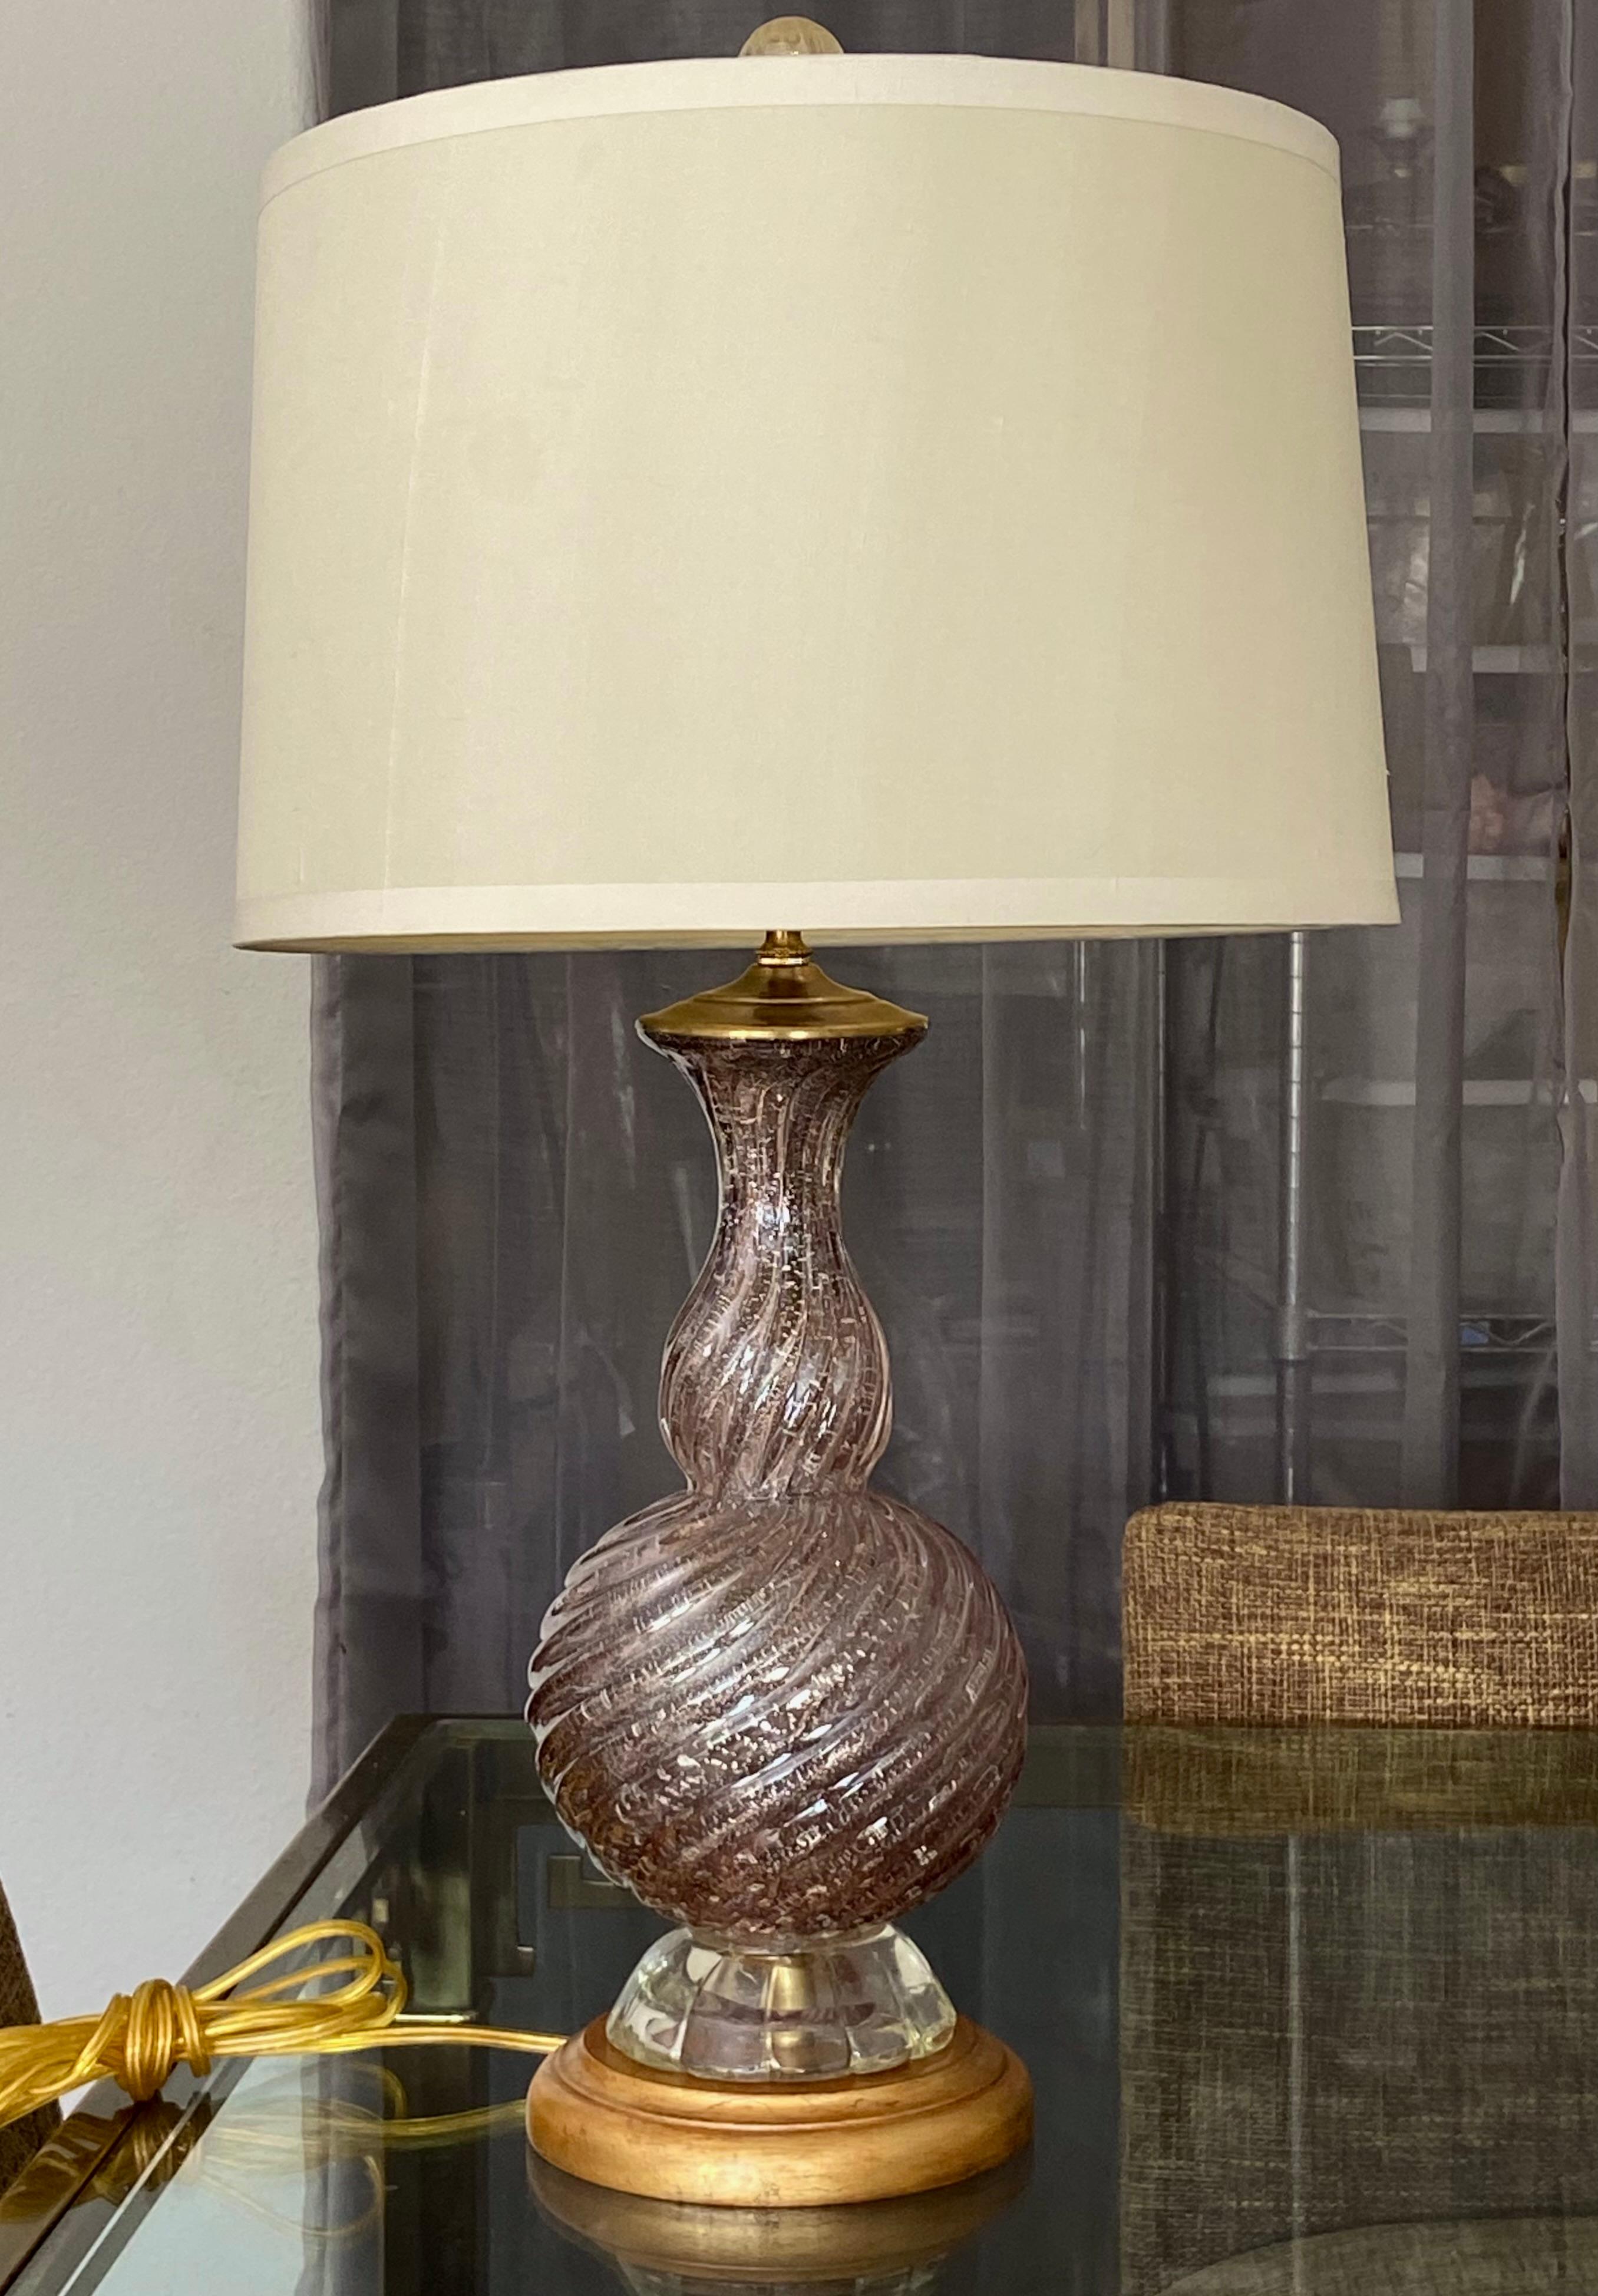 Murano Italian hand blown purple colored twisted glass table lamp with silver mica flecks throughout on custom gild wood base base. Rewired with new brass three way socket and cord. This handsome lamp strikes the perfect balance between modern and